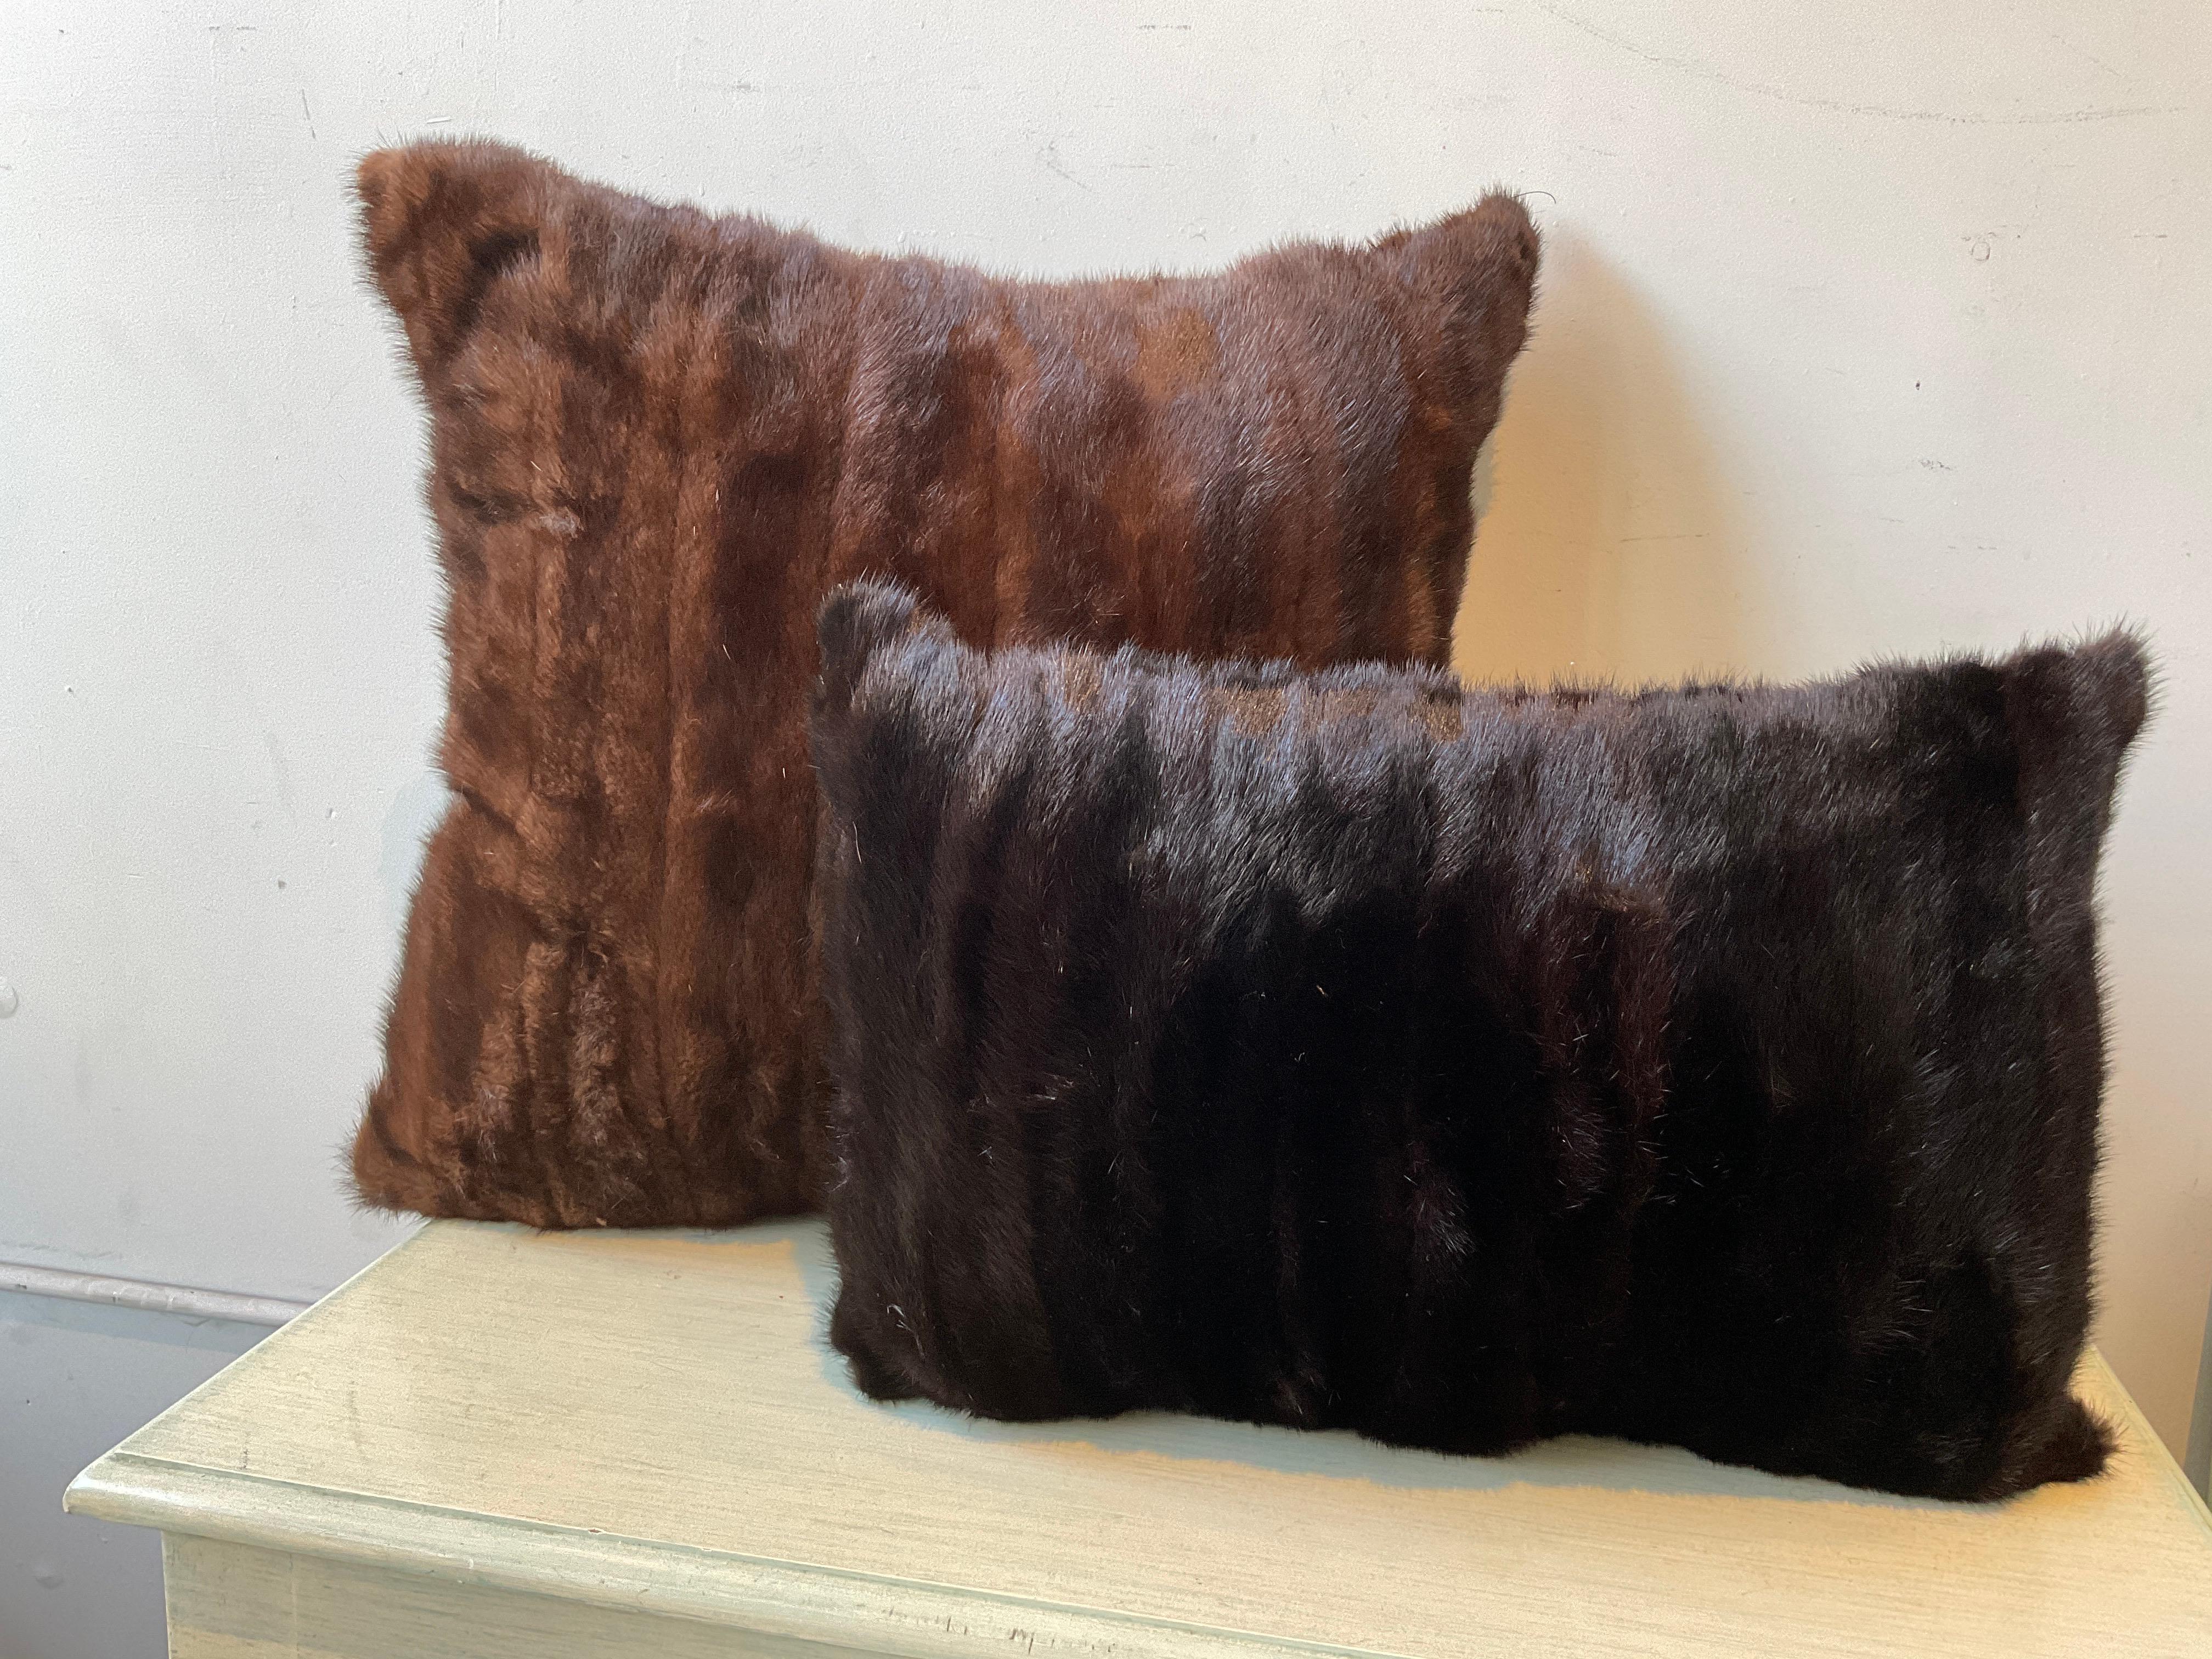 Mink pillow.  Pillows have a zipper . Down insert.Small pillow is H12 W19 D4.5
These pillows are priced separately. The price is per pillow.
Large pillow is marked 700, the small pillow is marked 500.